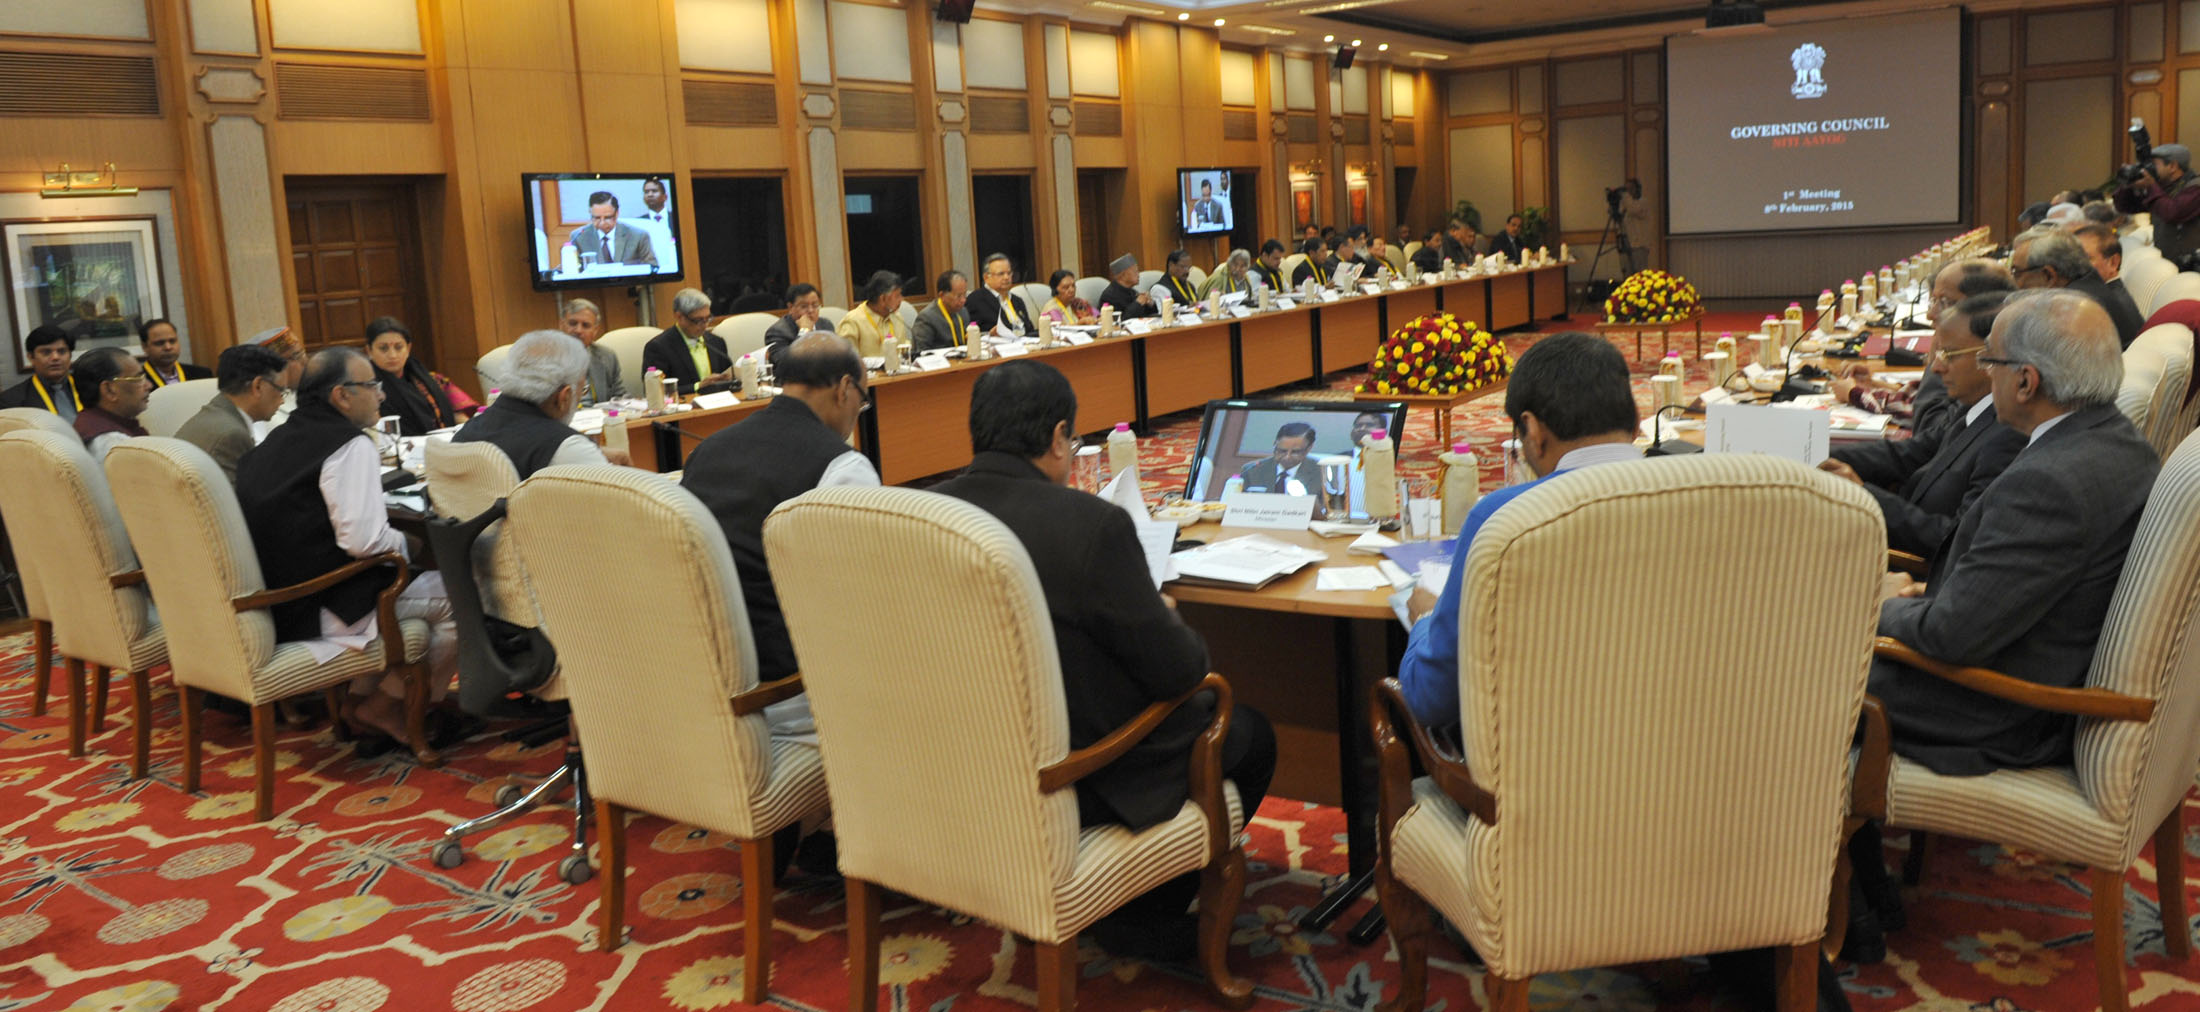 Narendra Modi chairing the Team India, first meeting of the Governing Council of NITI Aayog